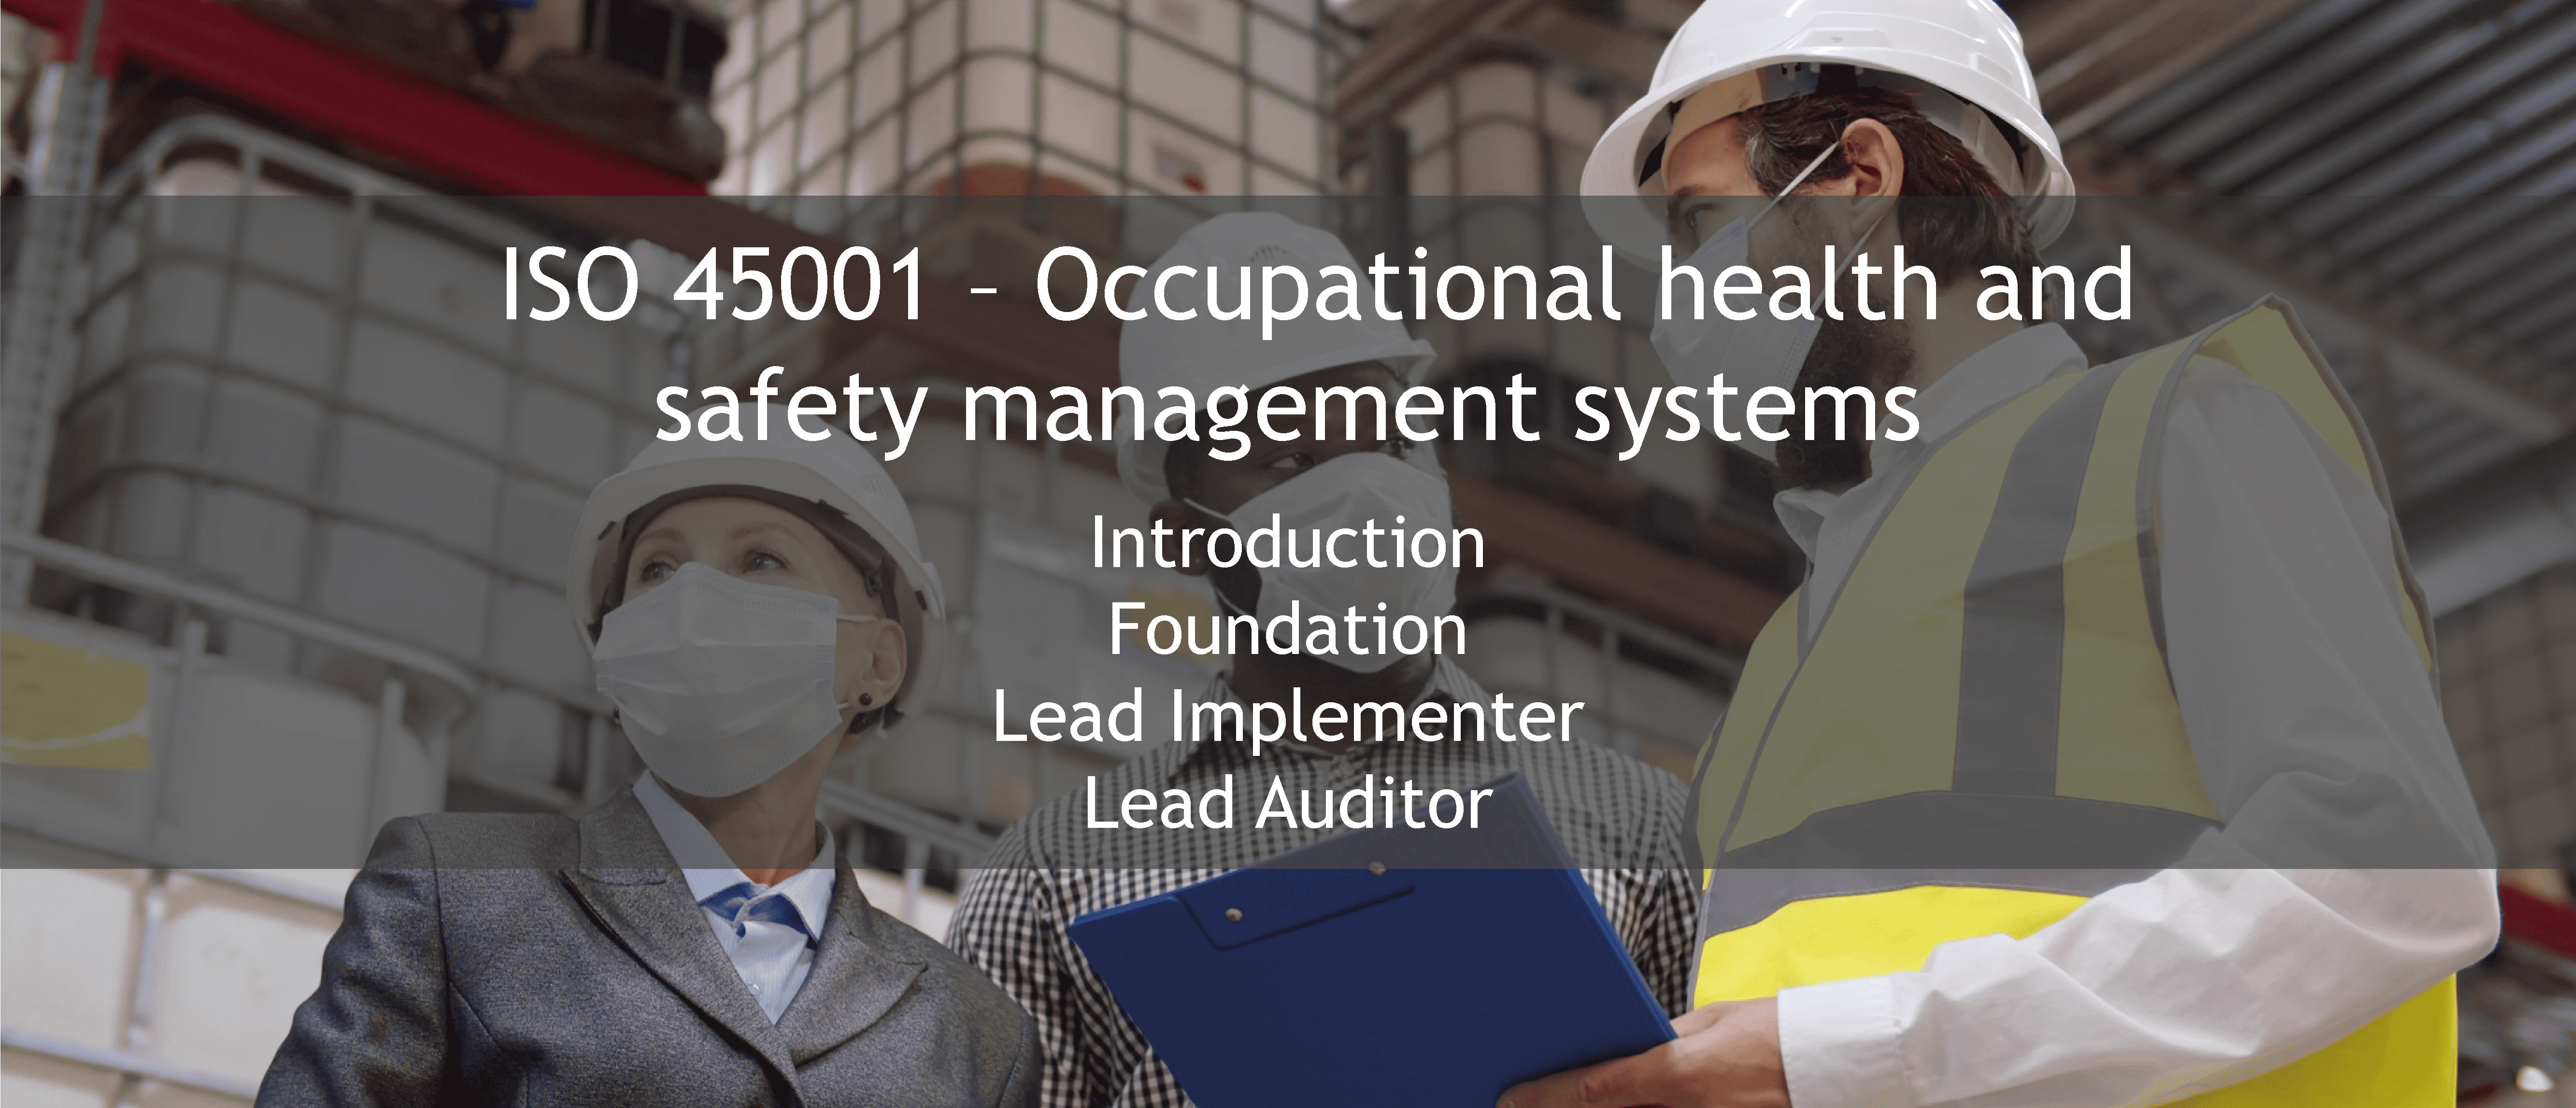 ISO 45001 training offer - ISO 22000 - Food Safety Management System